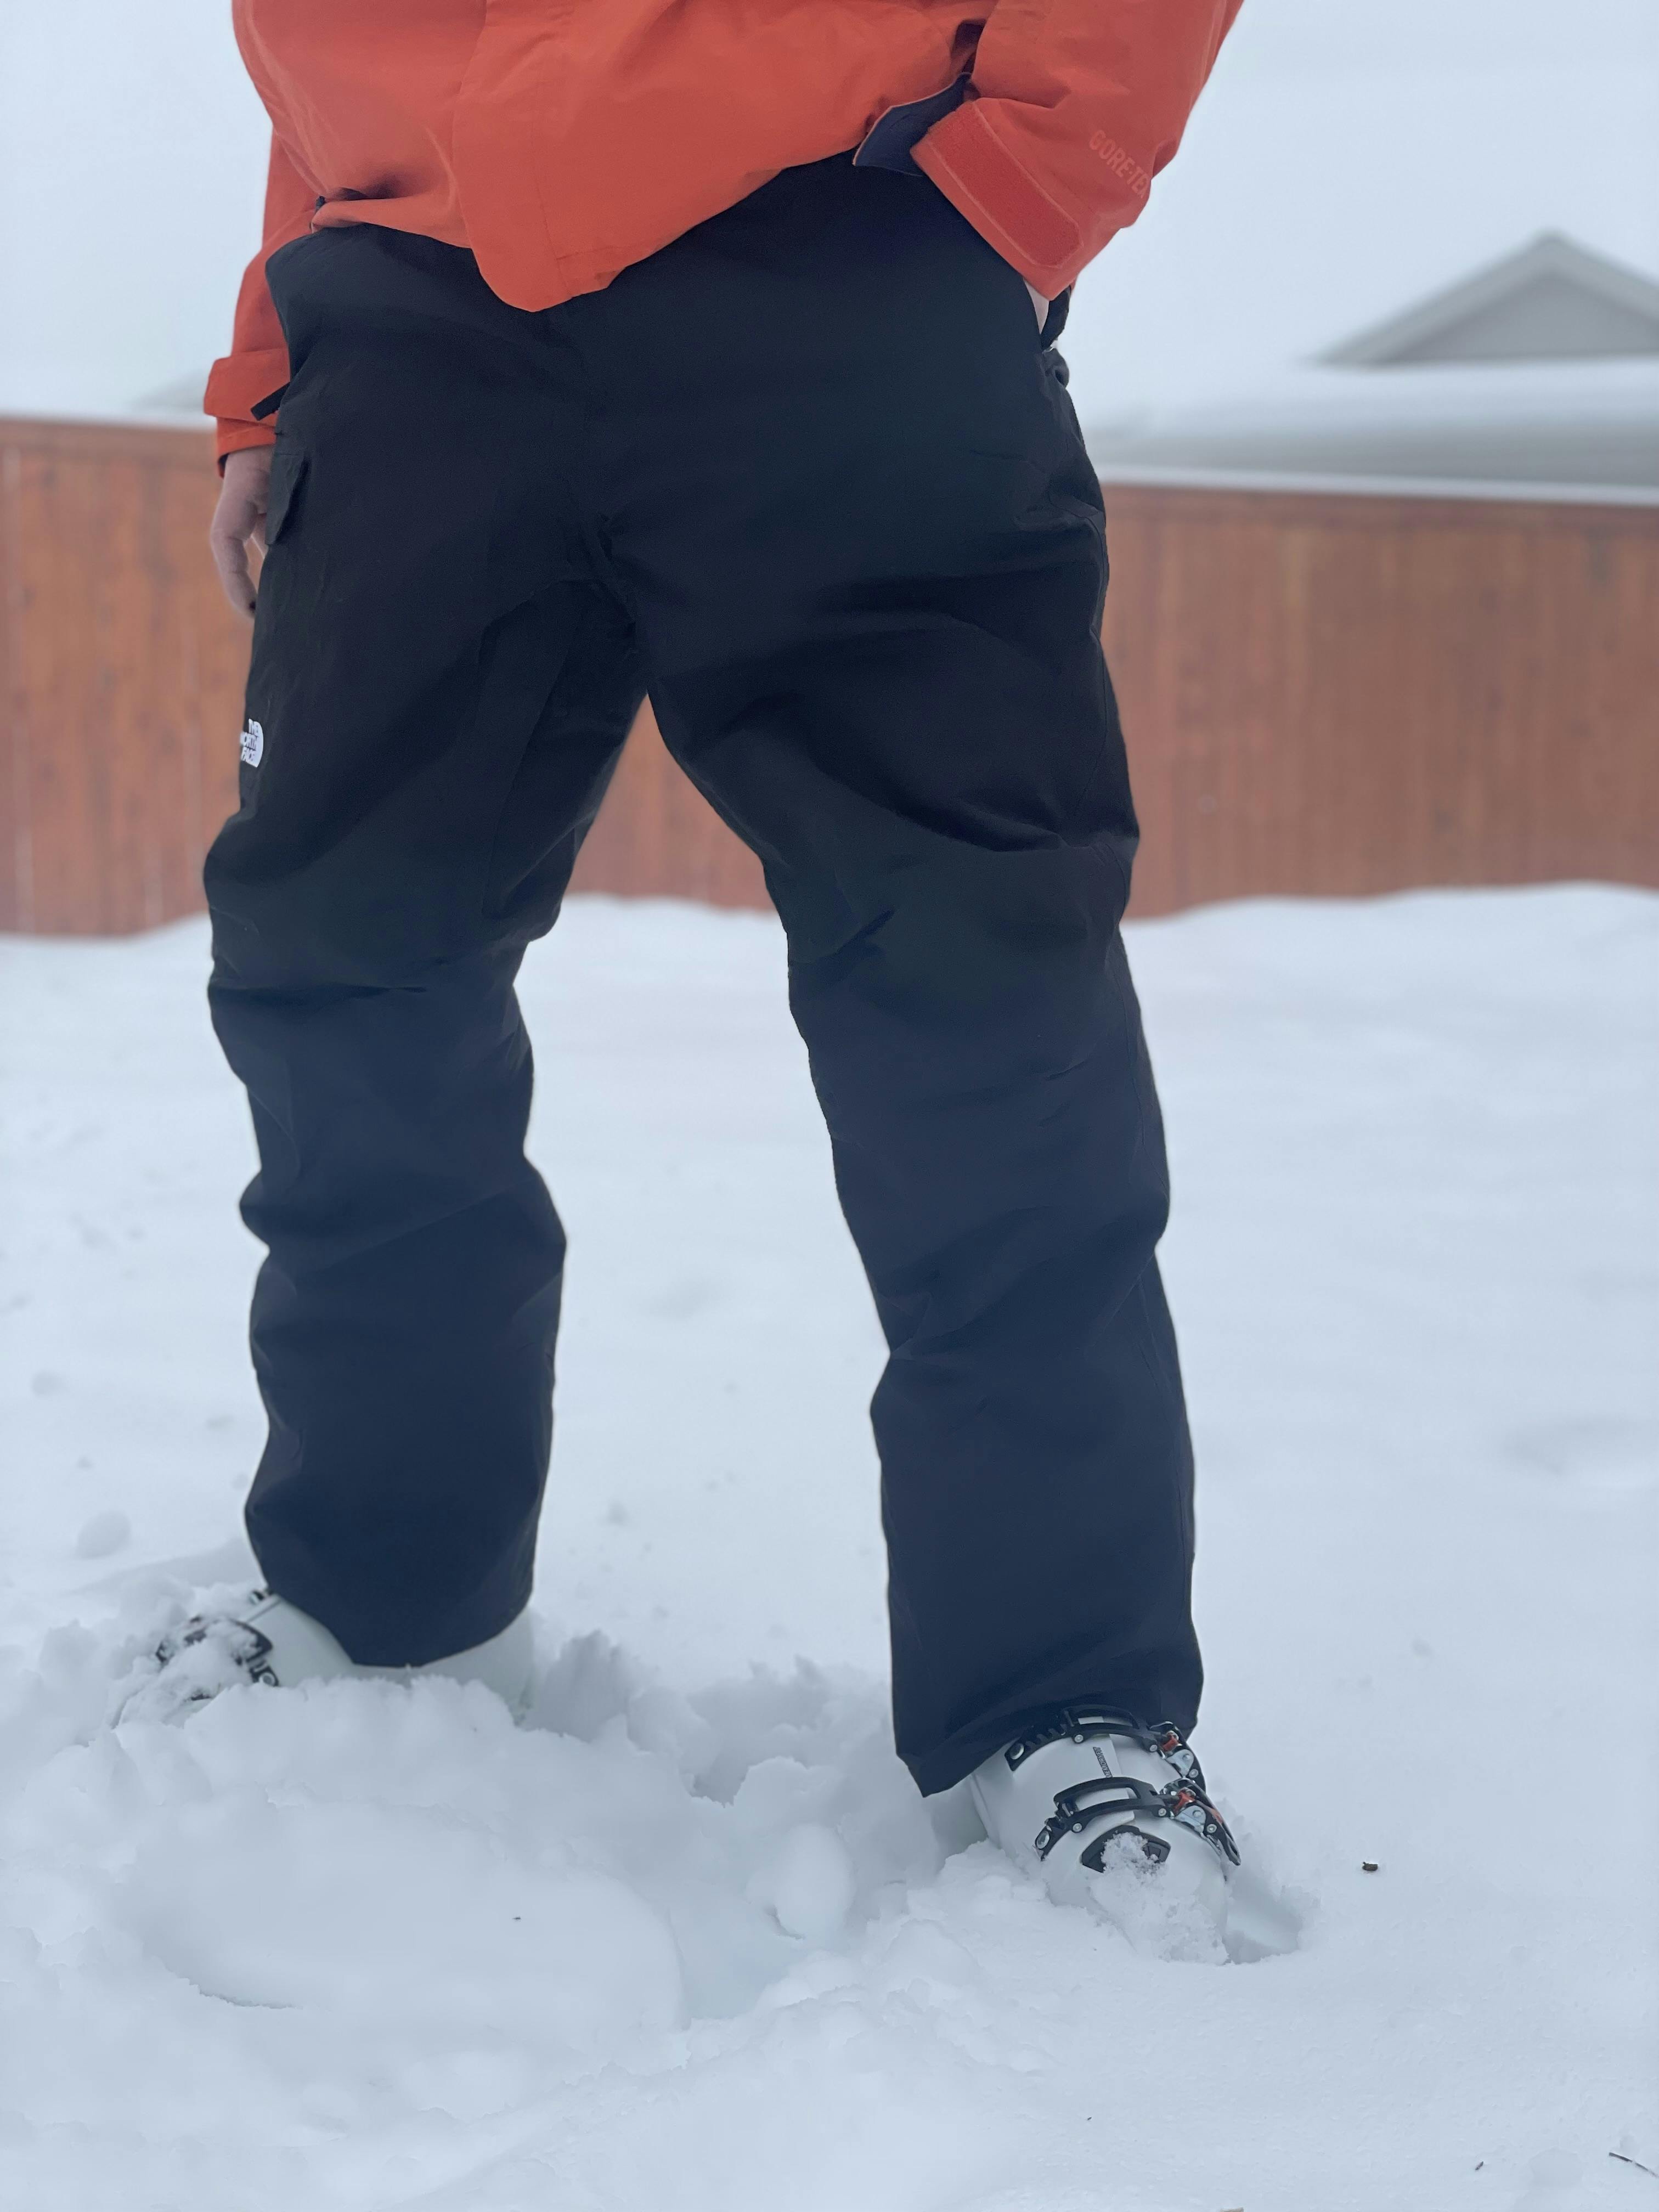 Expert Review: The North Face Men's Freedom Insulated Pants